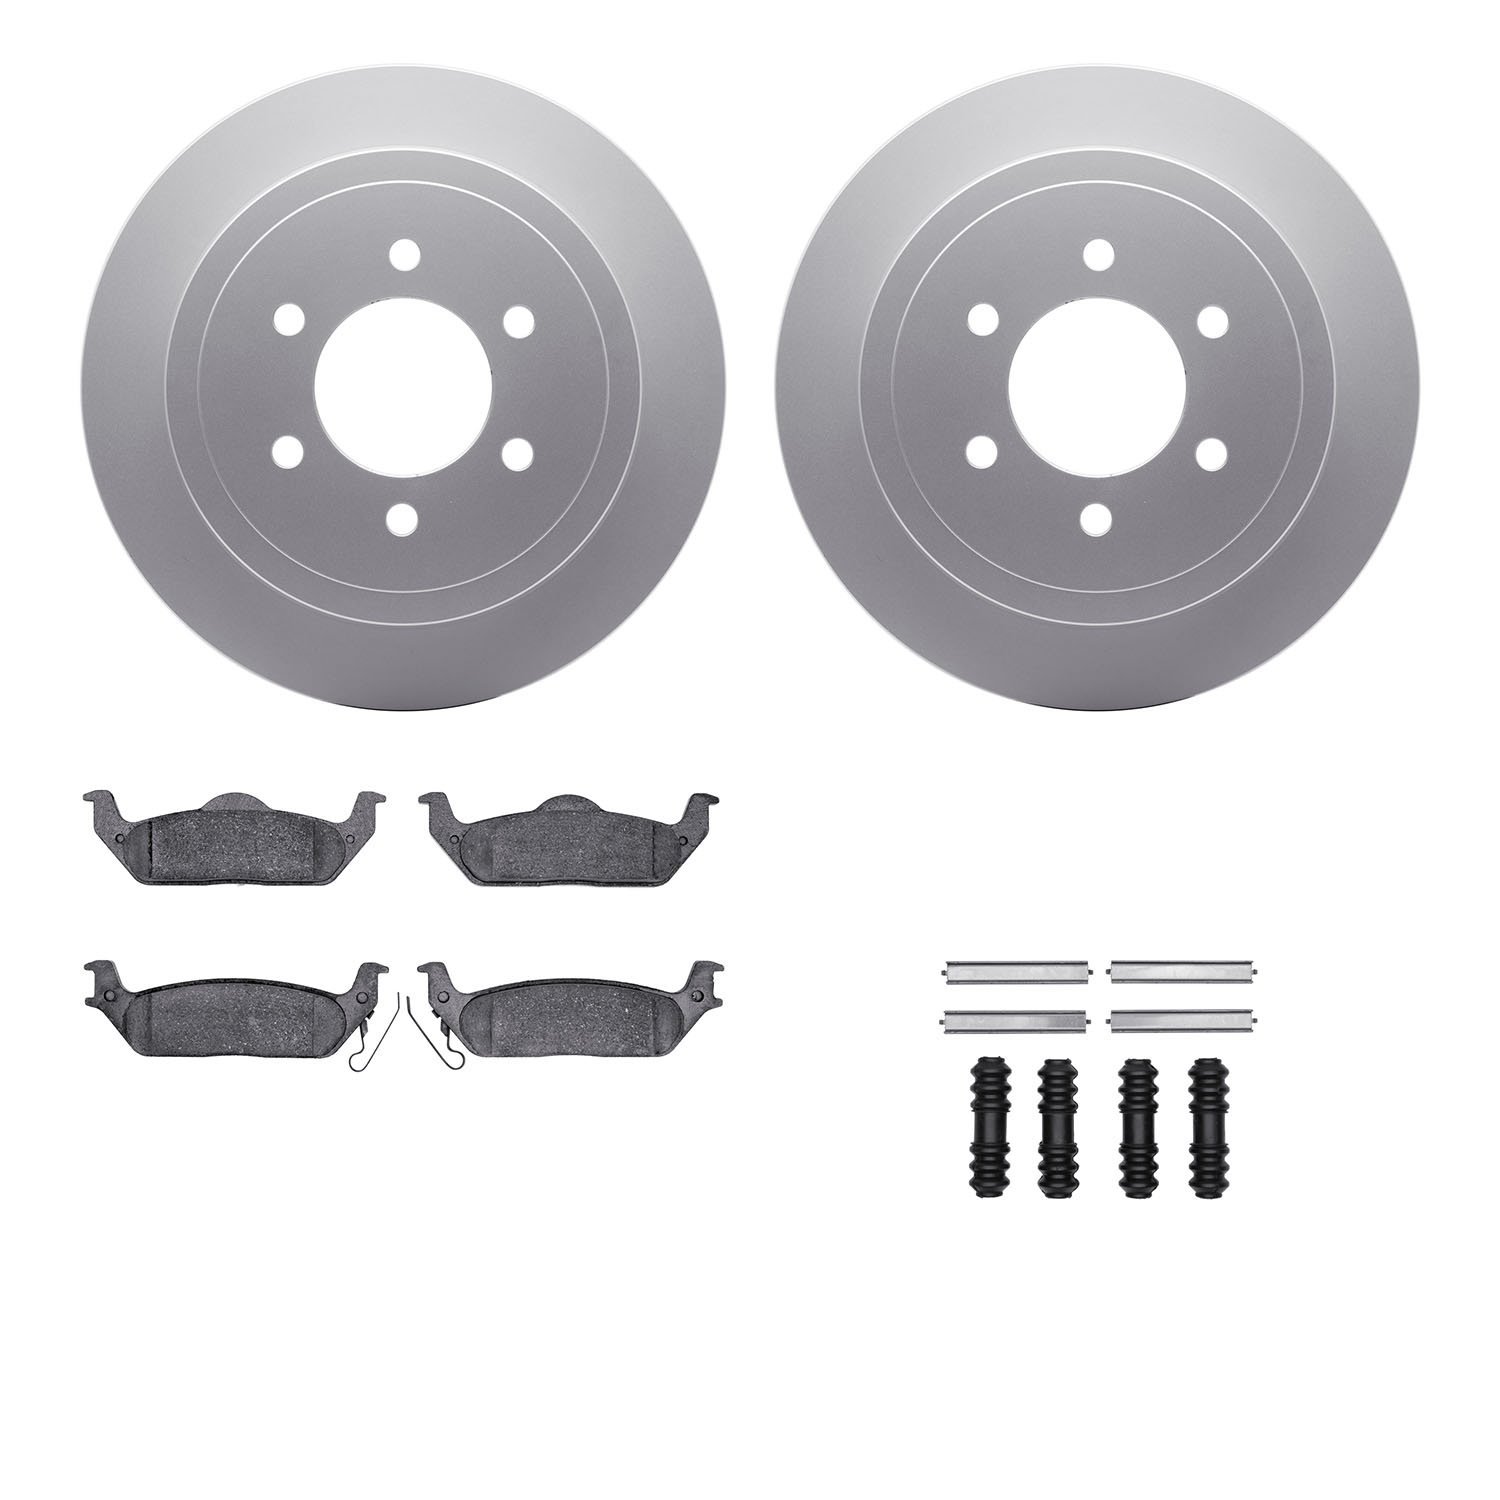 4412-54049 Geospec Brake Rotors with Ultimate-Duty Brake Pads & Hardware, 2004-2011 Ford/Lincoln/Mercury/Mazda, Position: Rear